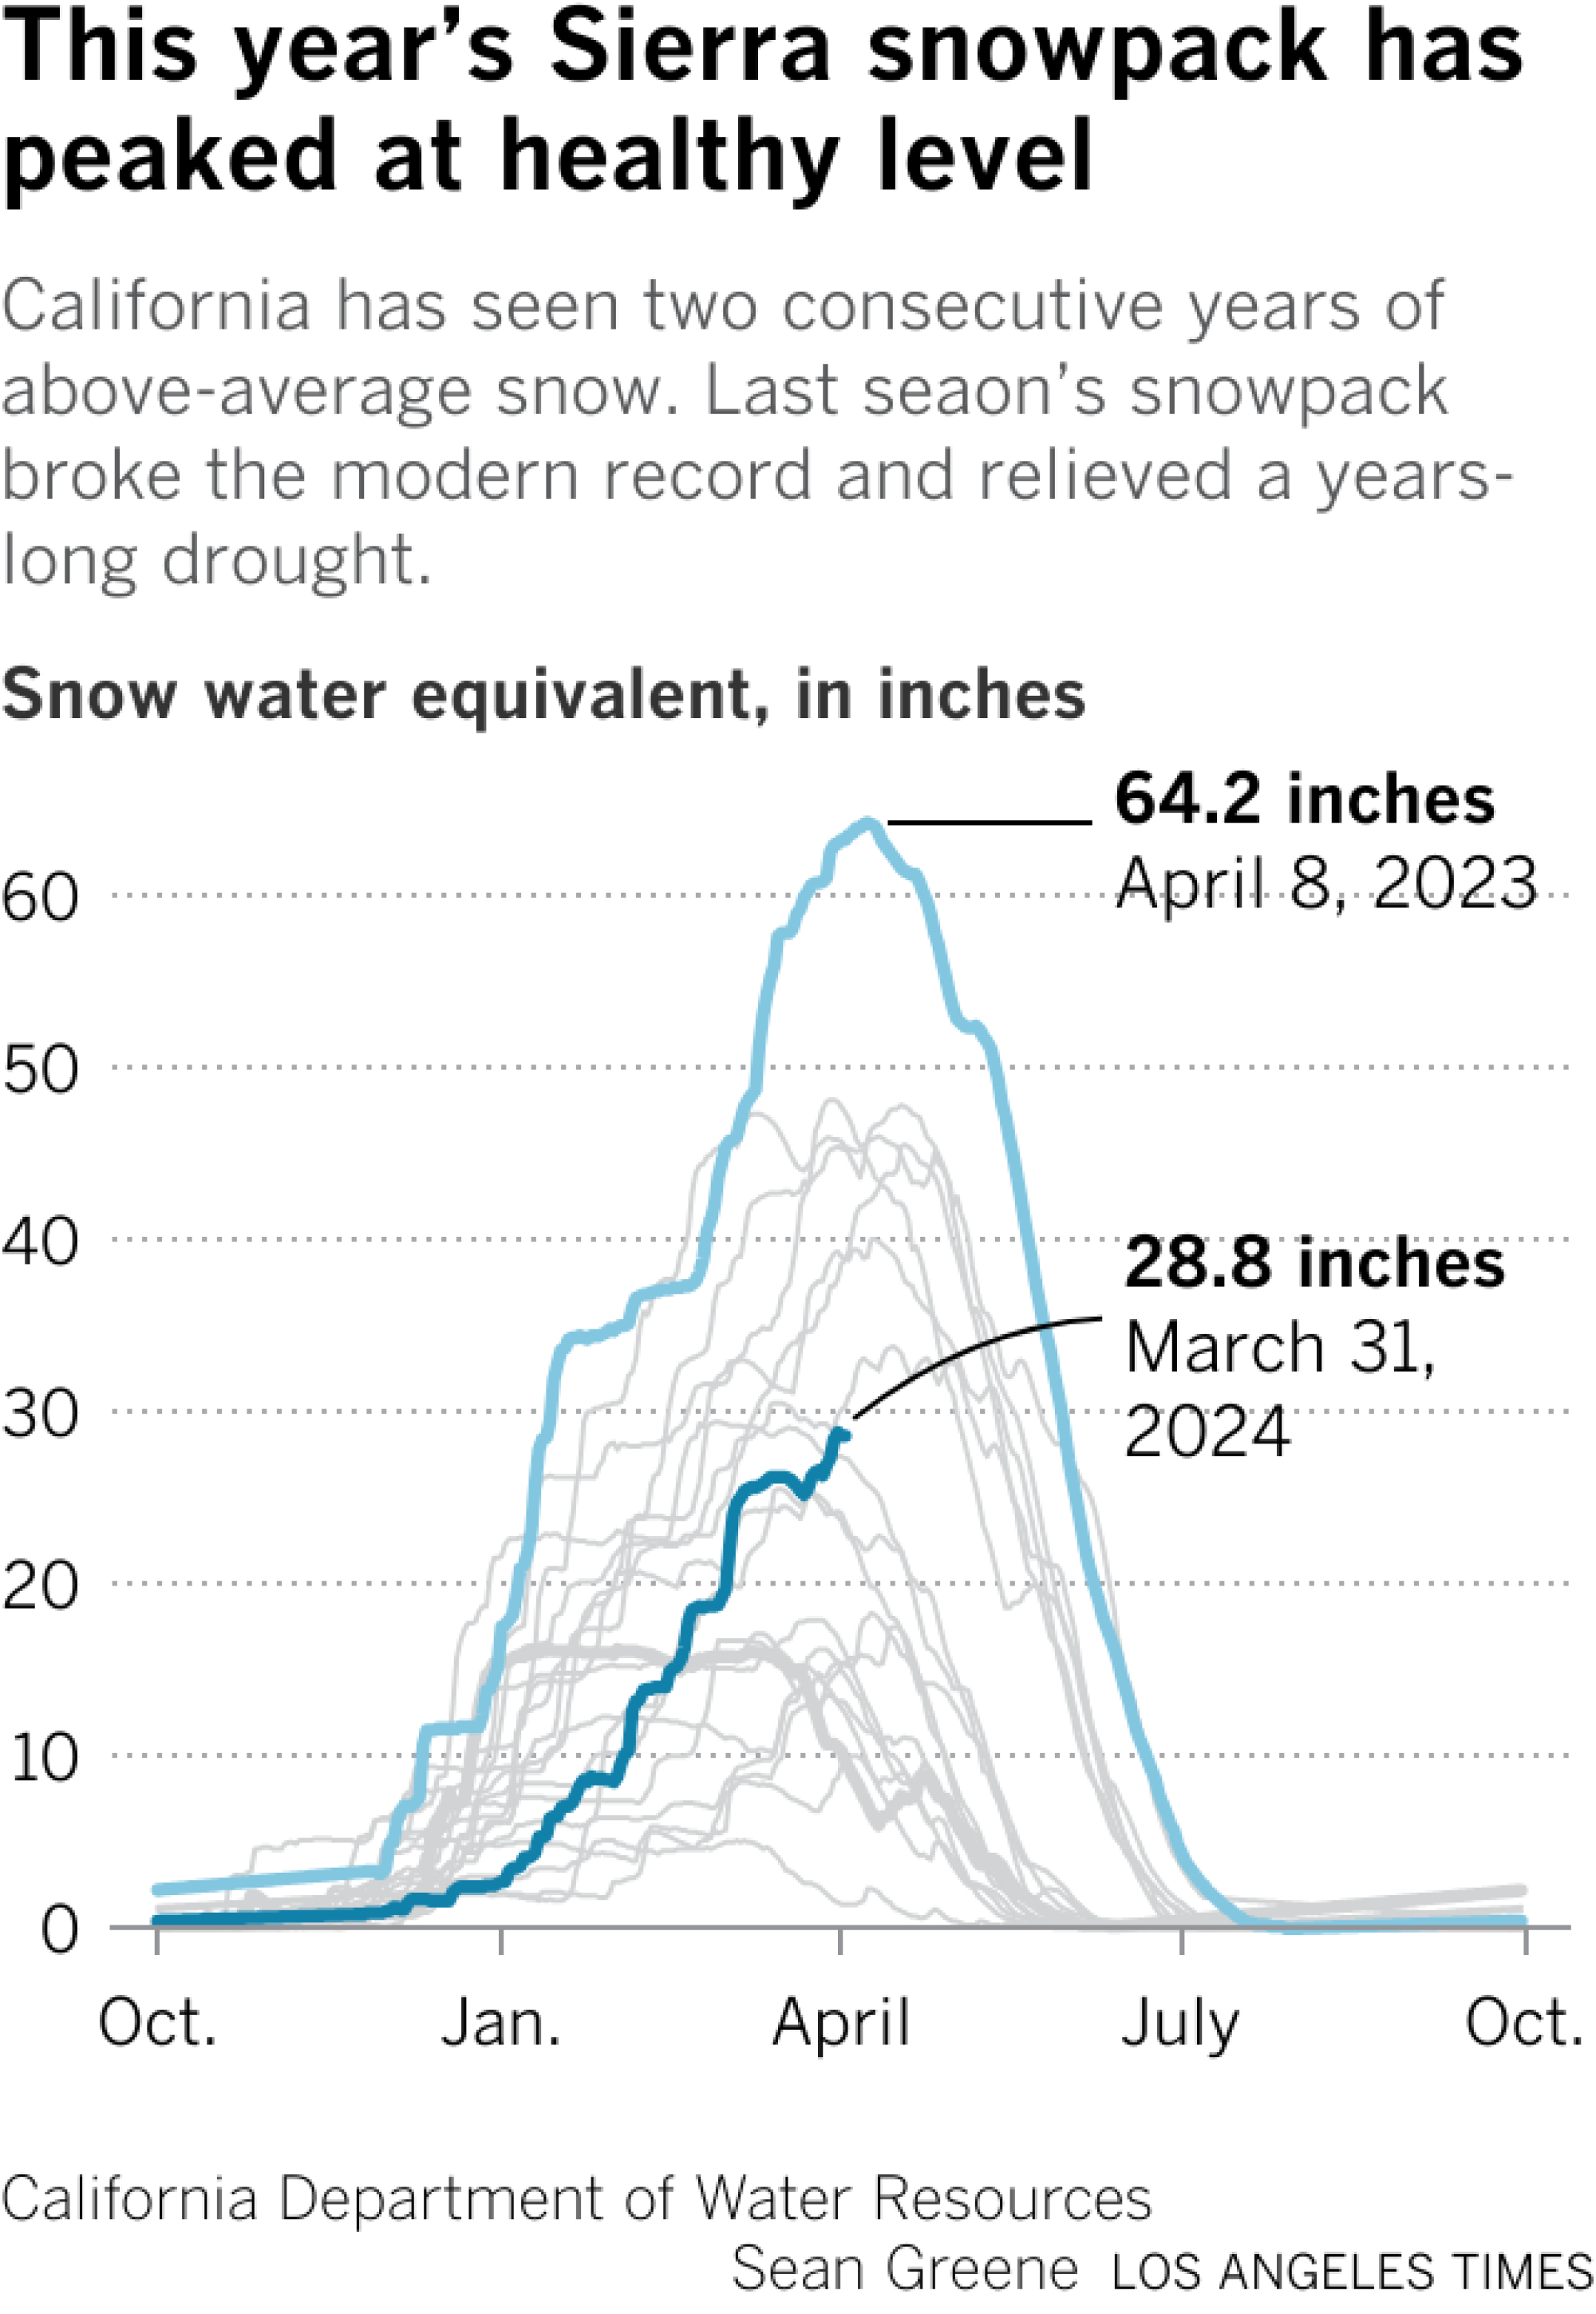 This line chart compares this year's snowpack with last year. The current snowpack has peaked around 27 inches. Last year, the peak was 64.2 inches.